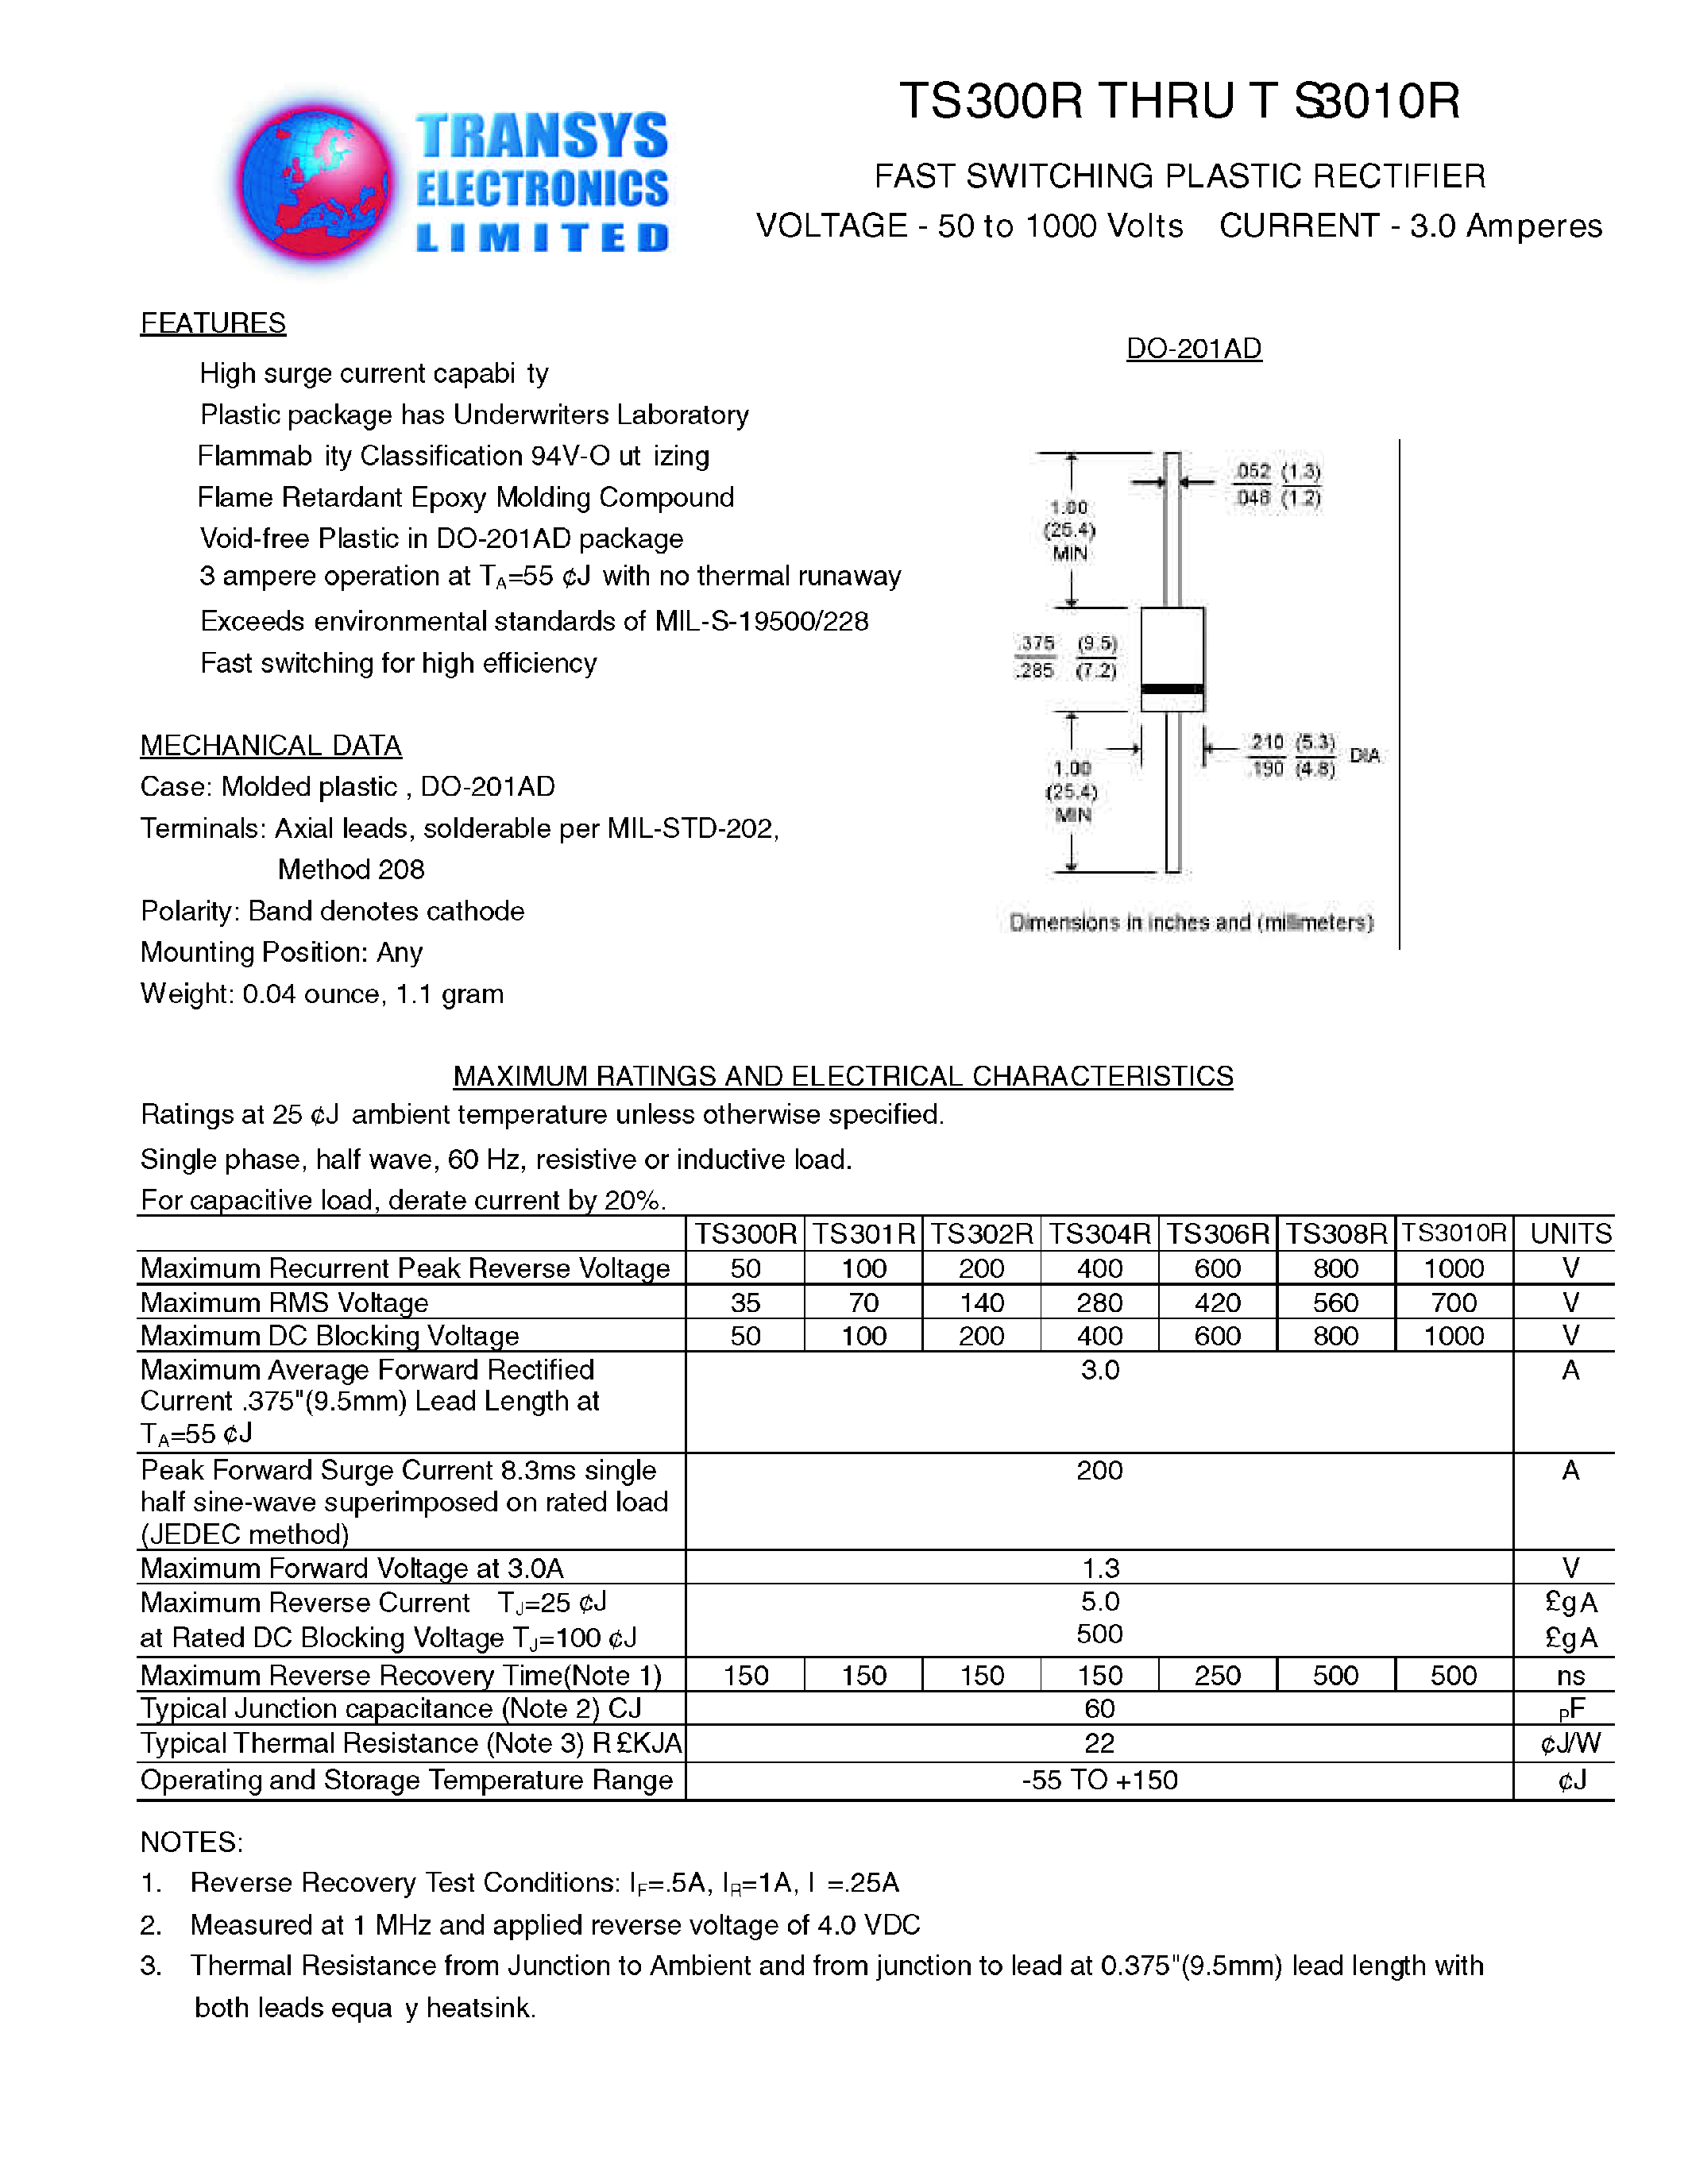 Datasheet TS300 - FAST SWITCHING PLASTIC RECTIFIER page 1